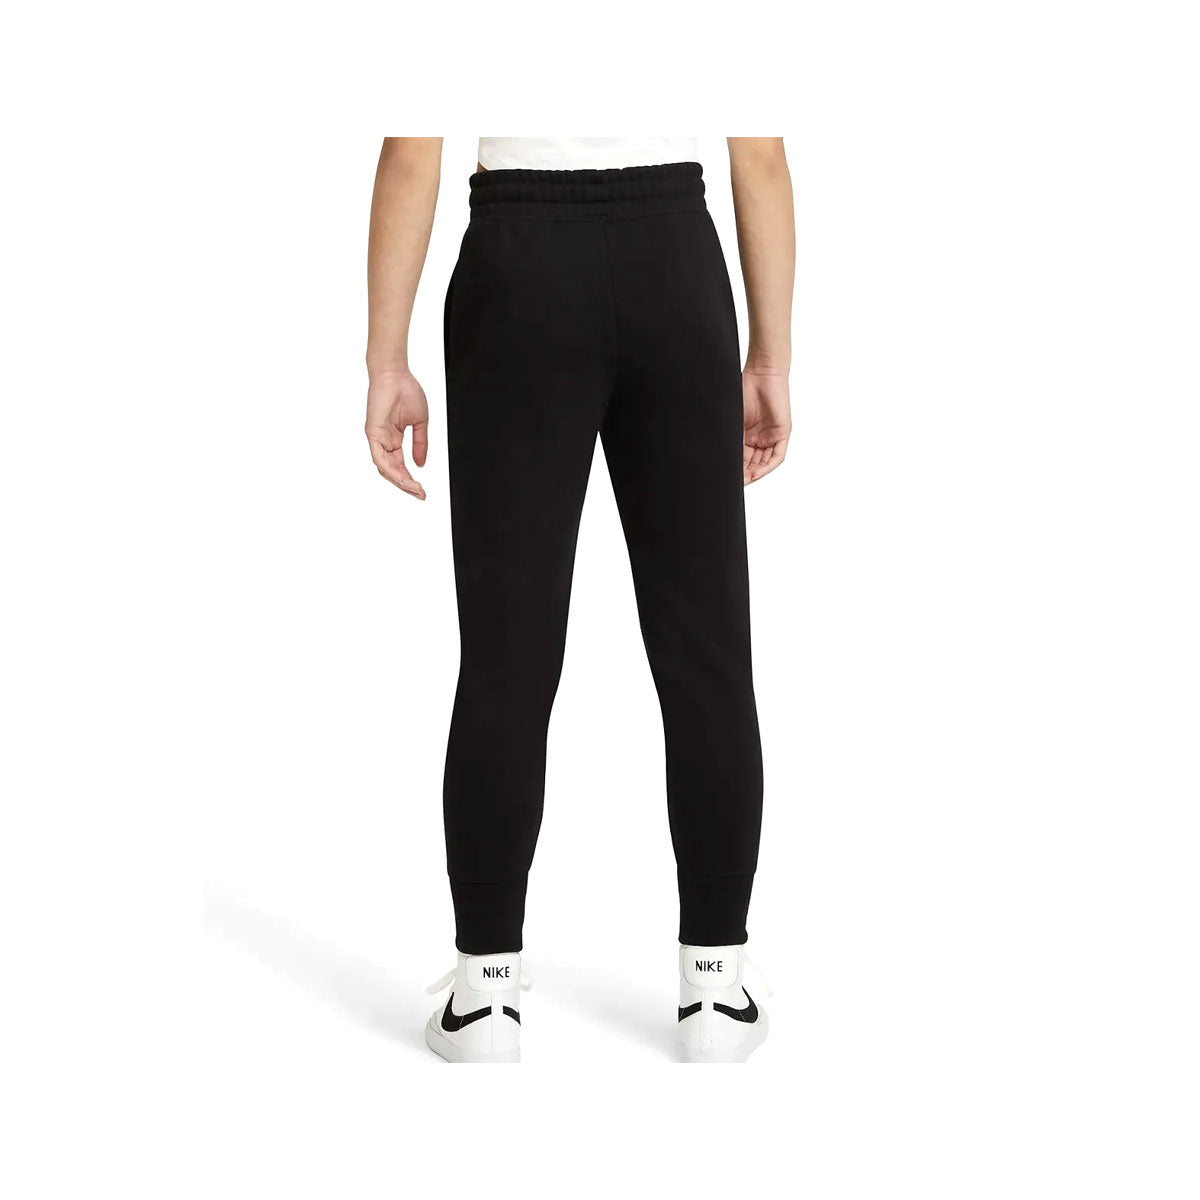 Nike Girls French Terry Pants